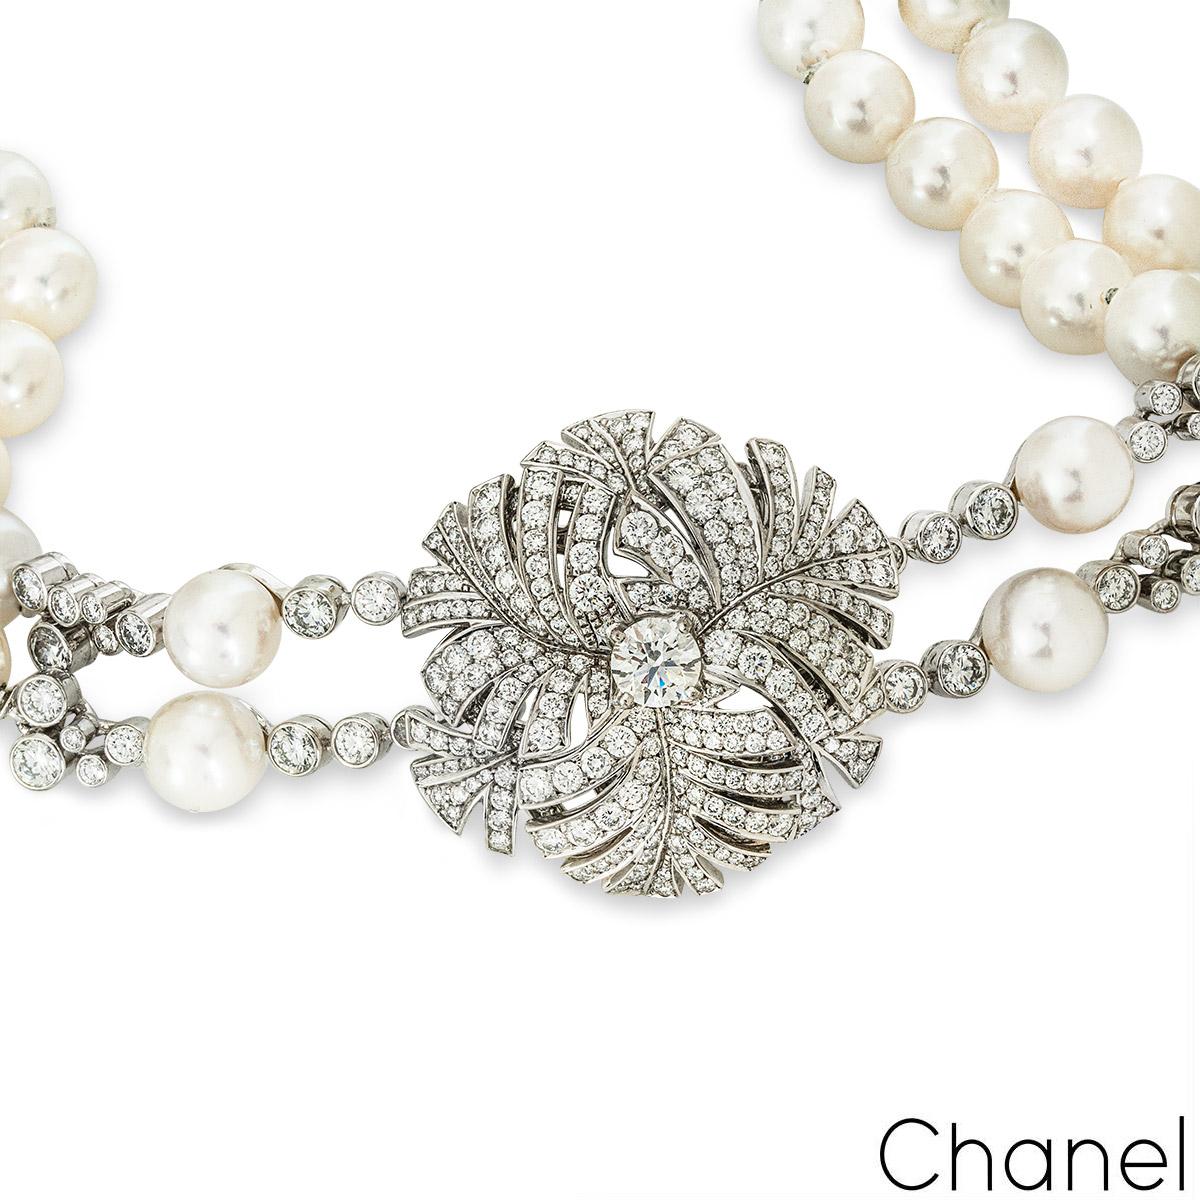 A beautiful 18k white gold diamond and pearl Chanel bracelet from the Panache collection. The bracelet comprises of a floral motif set to the centre with a 0.53ct round brilliant cut diamond in a 4 claw setting in the middle of the star, F colour